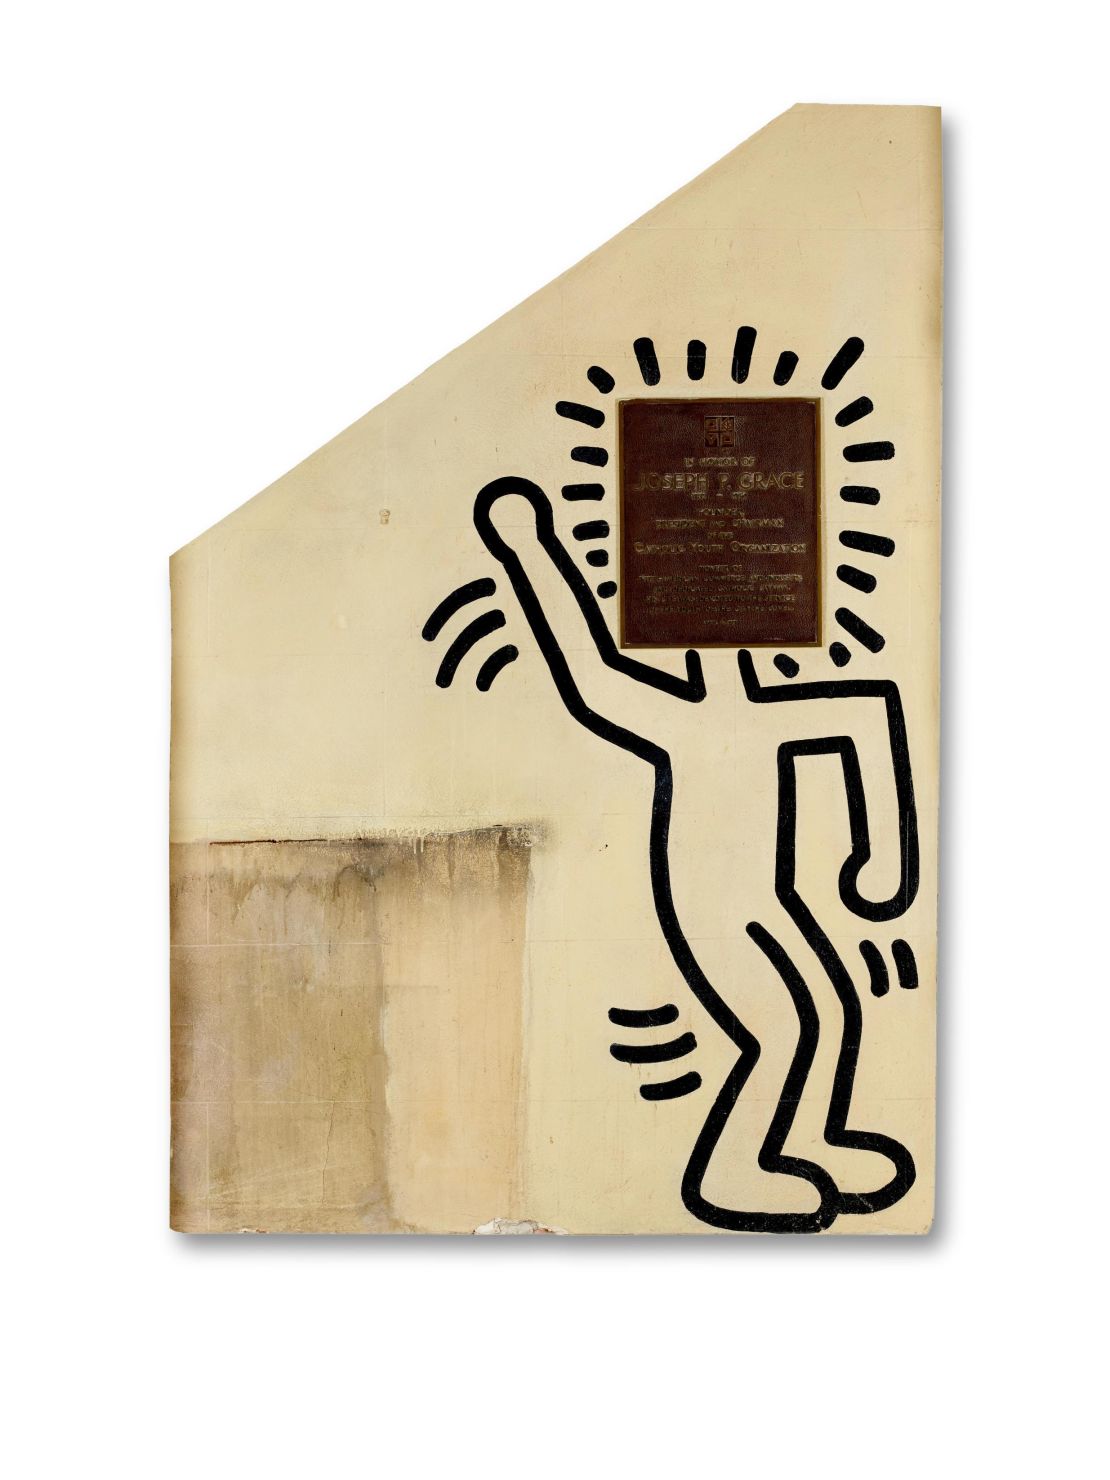 "Untitled (The Church of the Ascension Grace House Mural)" (ca. 1983--84) by Keith Haring.